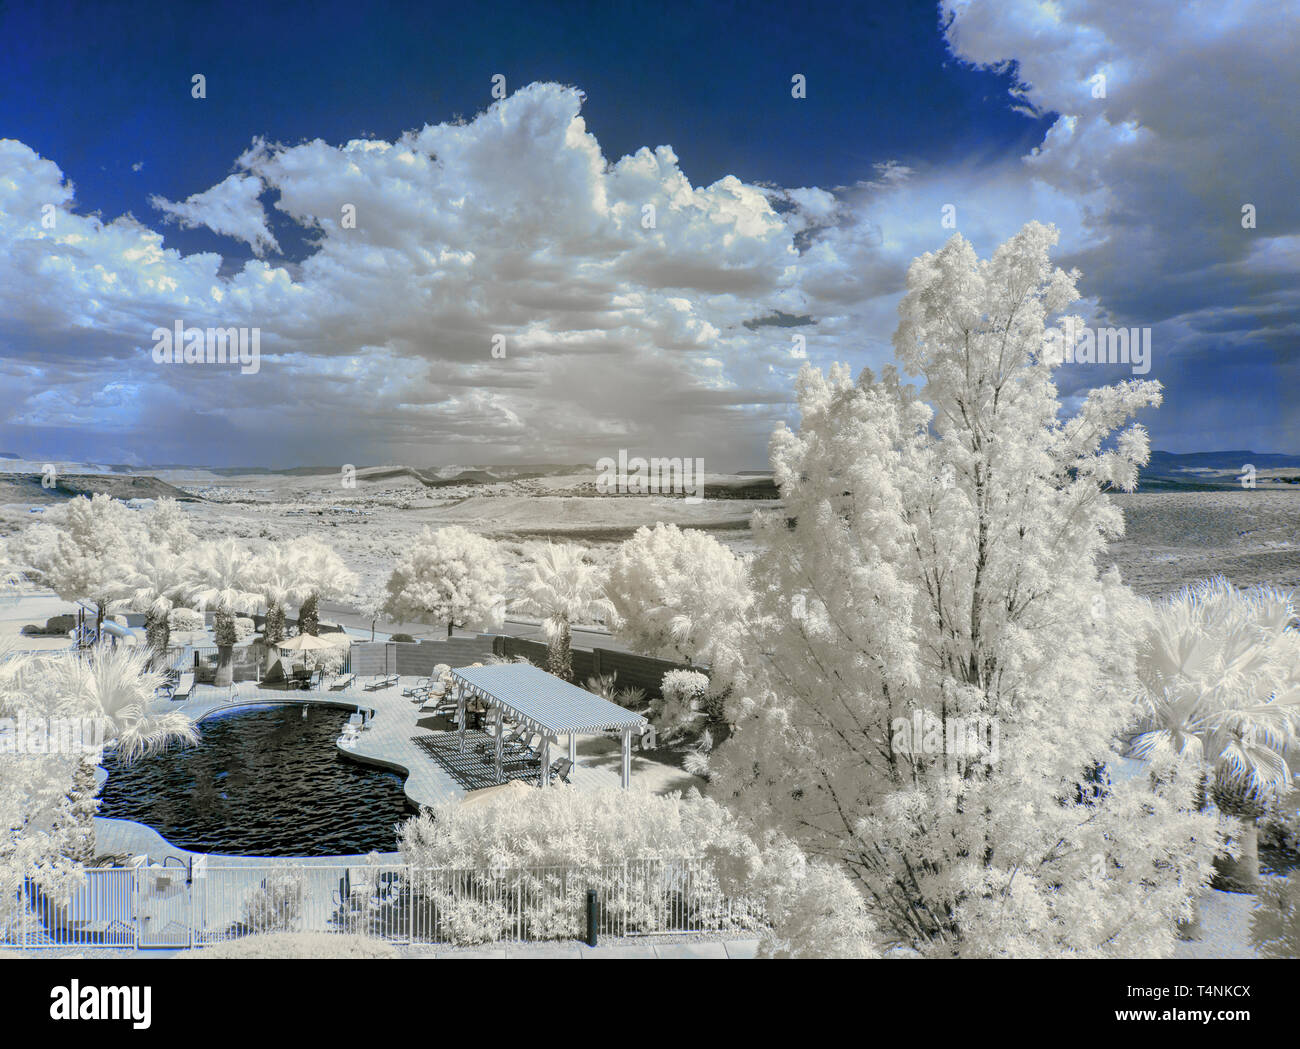 Frosty covered trees and icy swimming pool under blue skies with white clouds. Winter snow. Stock Photo